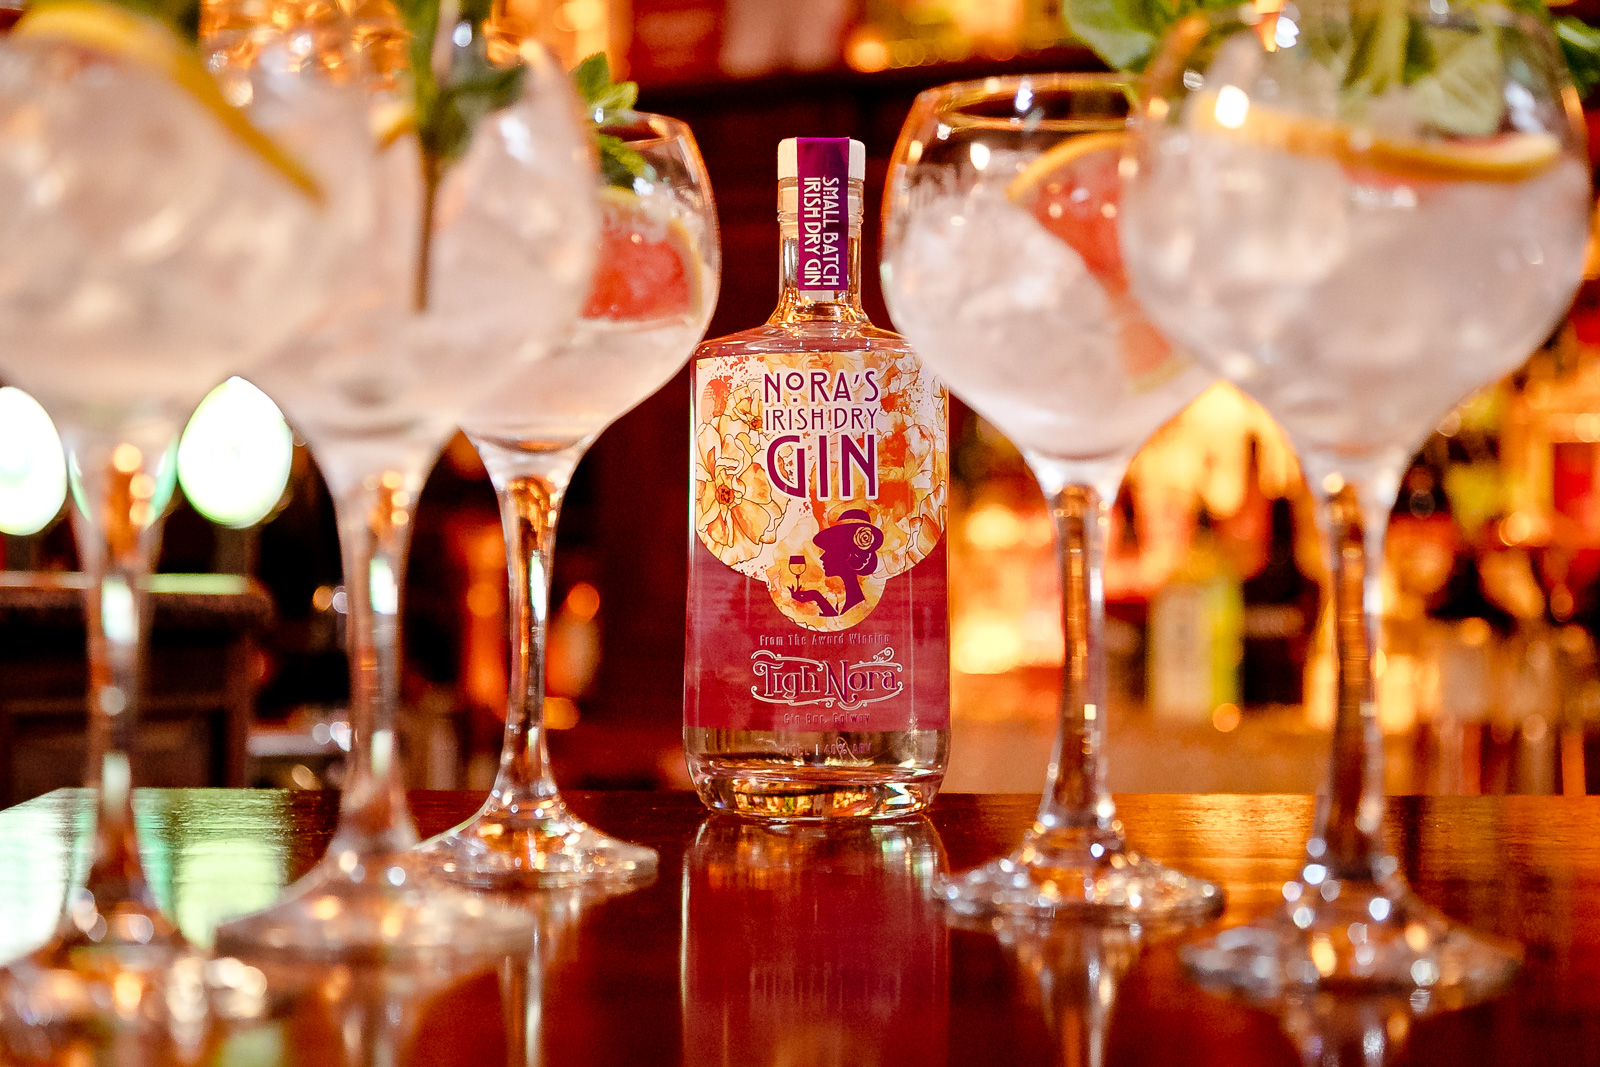 This Galway bar has become the first in Ireland to launch its very own gin